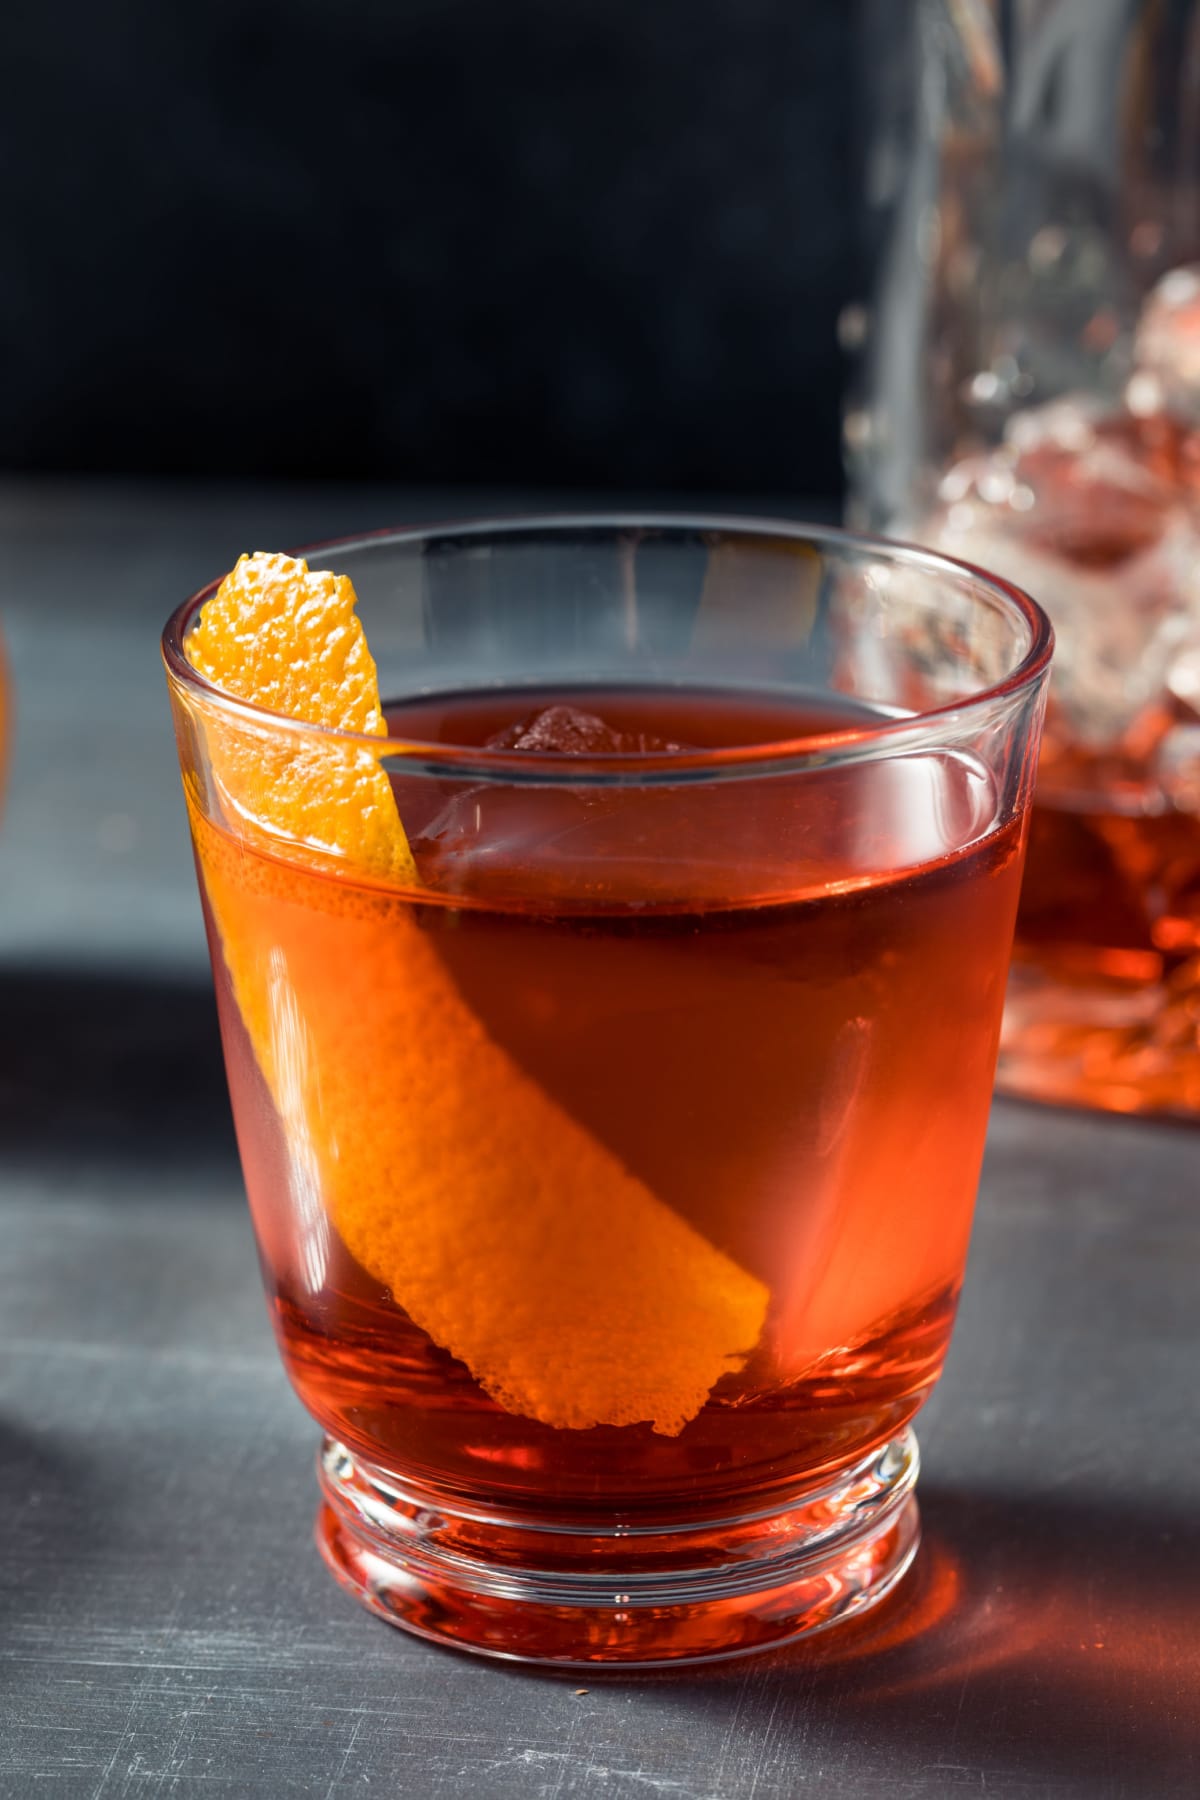 A glass of Mezcal Negroni cocktail garnished with lemon peel.